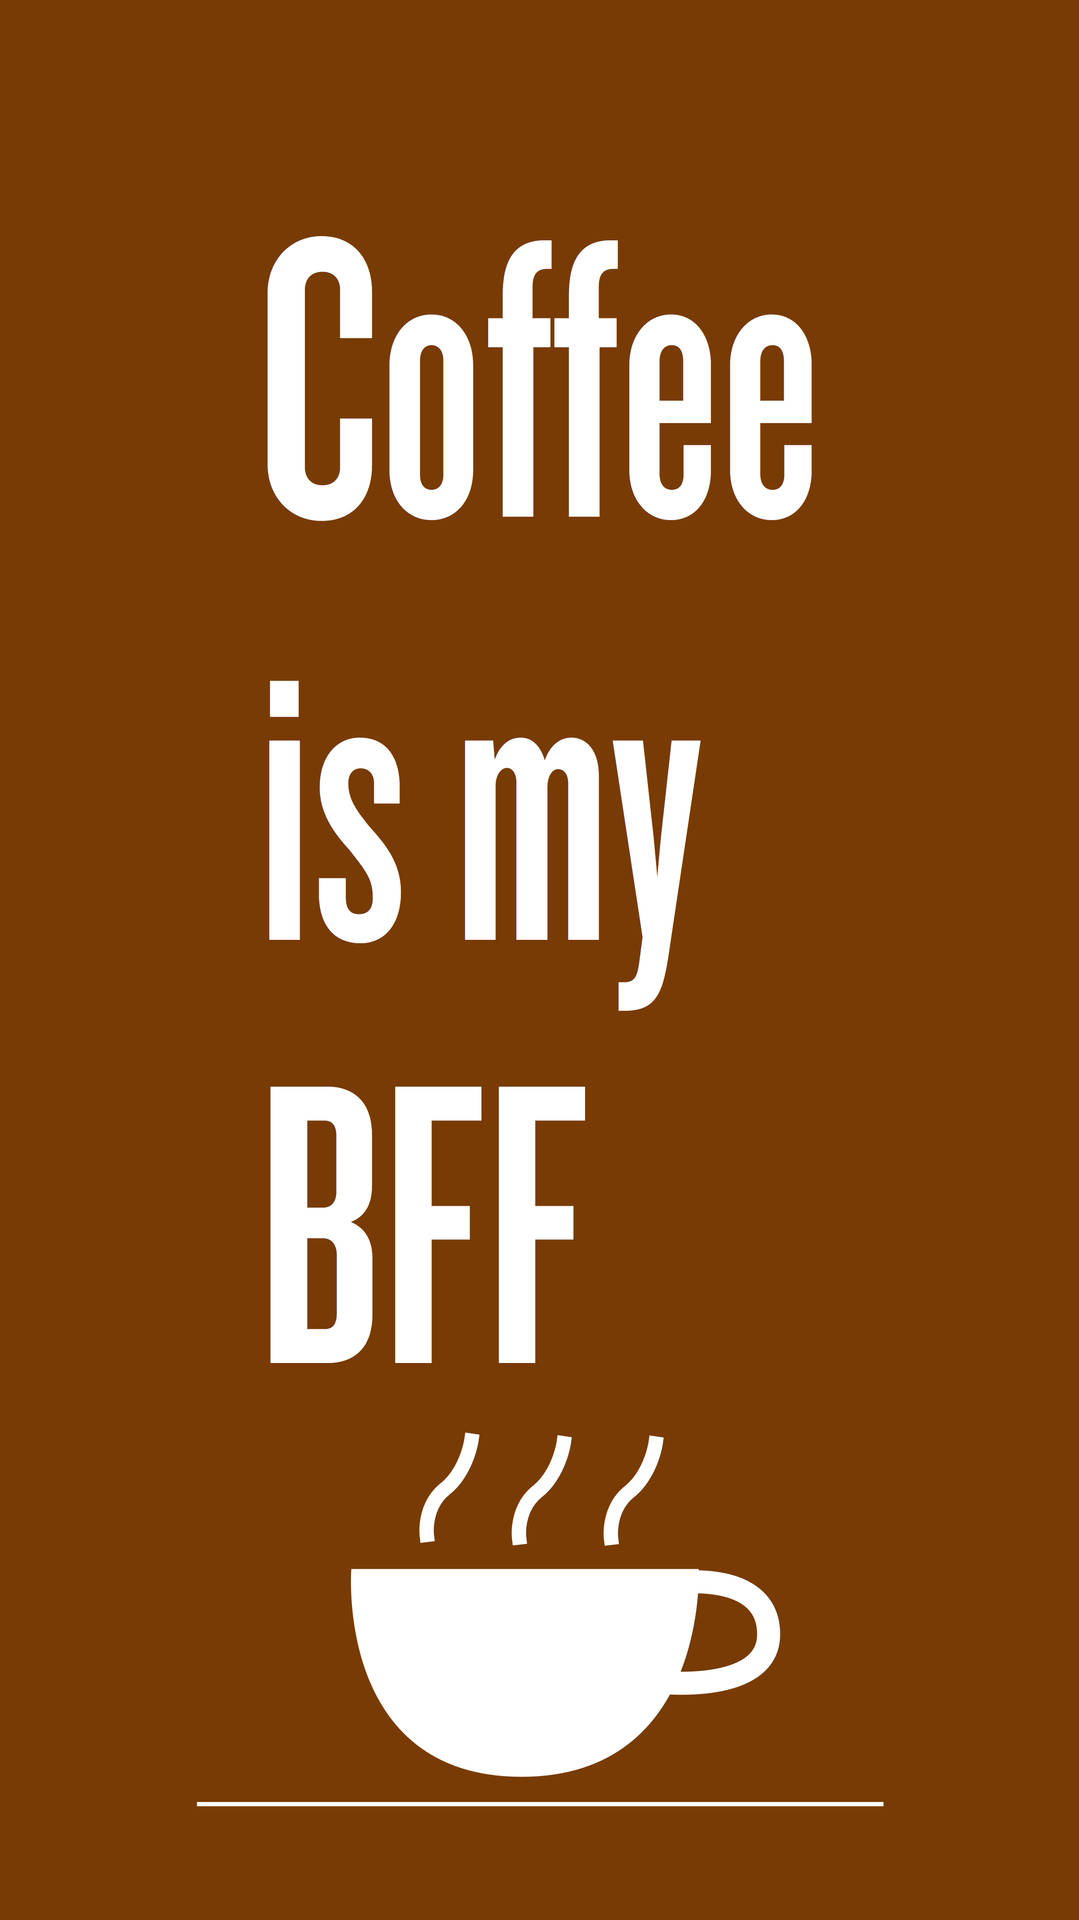 Indulge In The Deliciousness Of Coffee, It's My Bff! Background